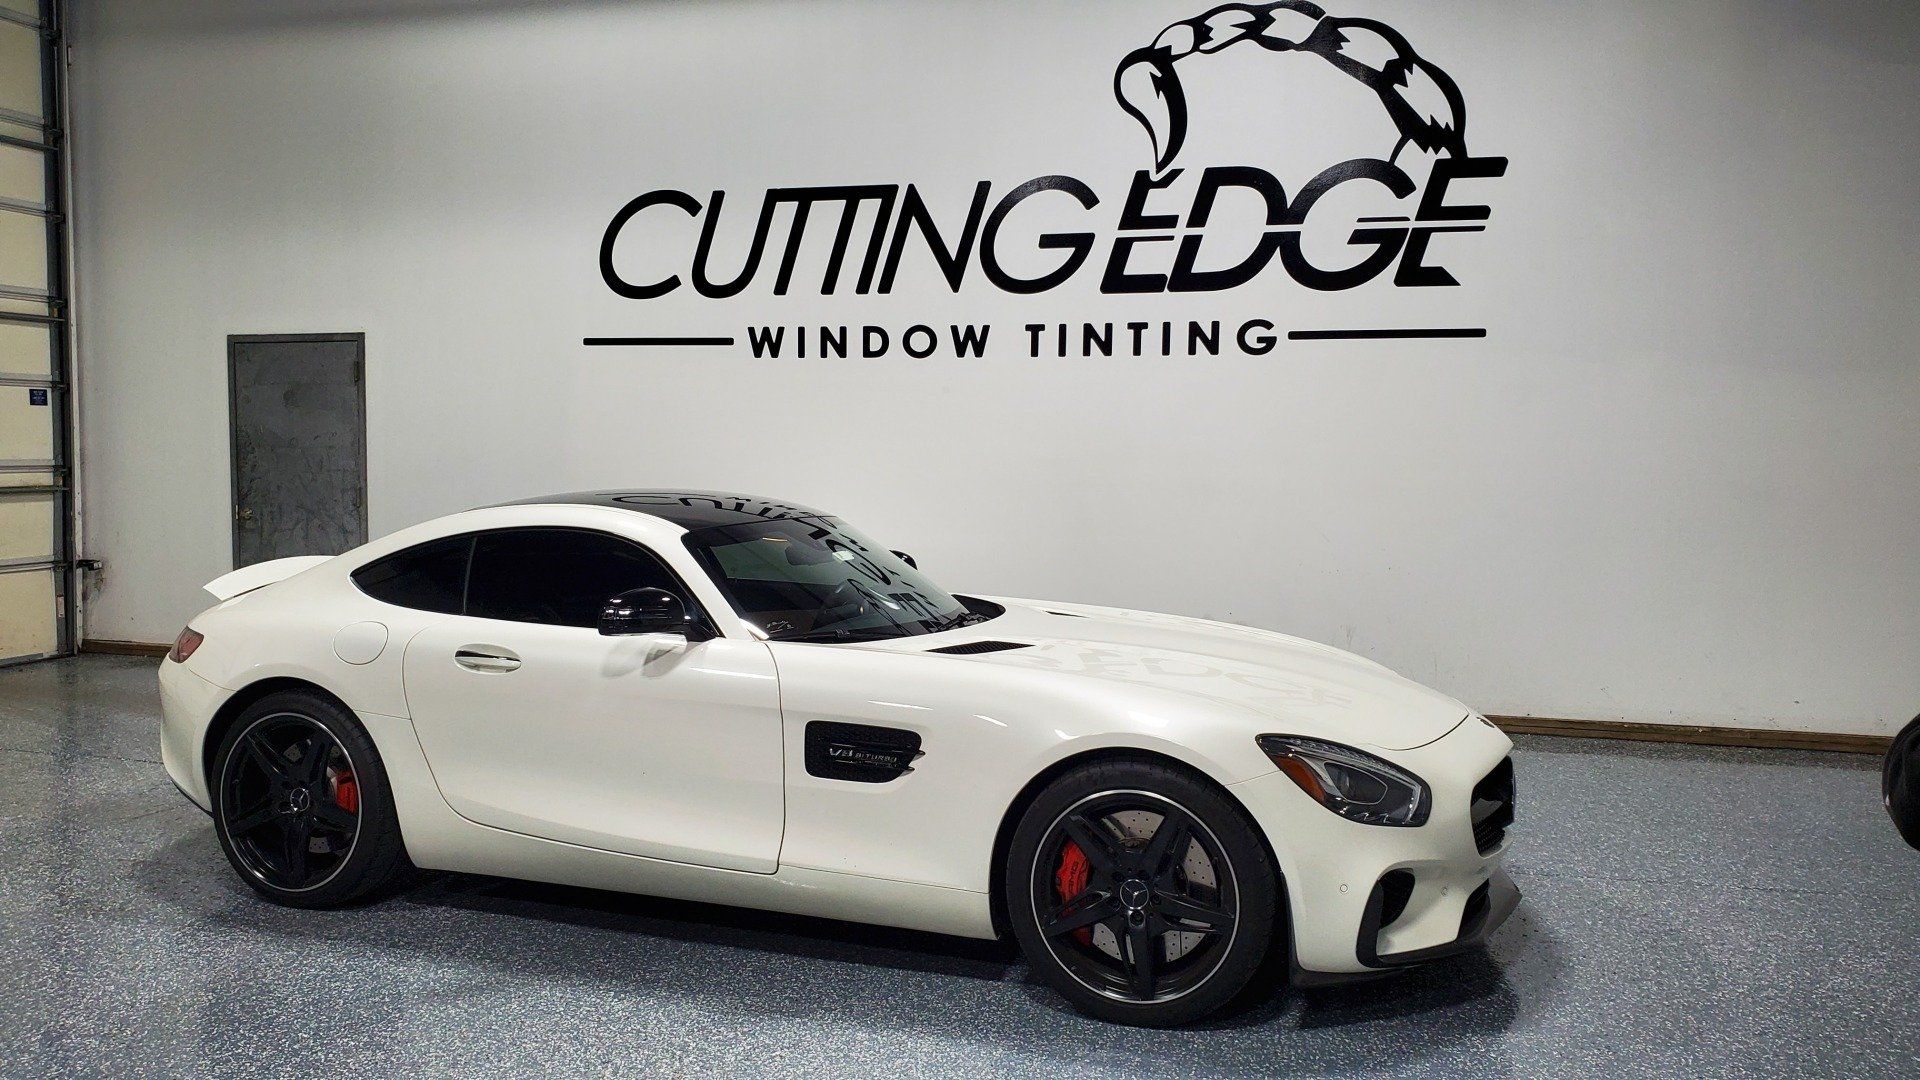 How Long Does Window Tinting Take?